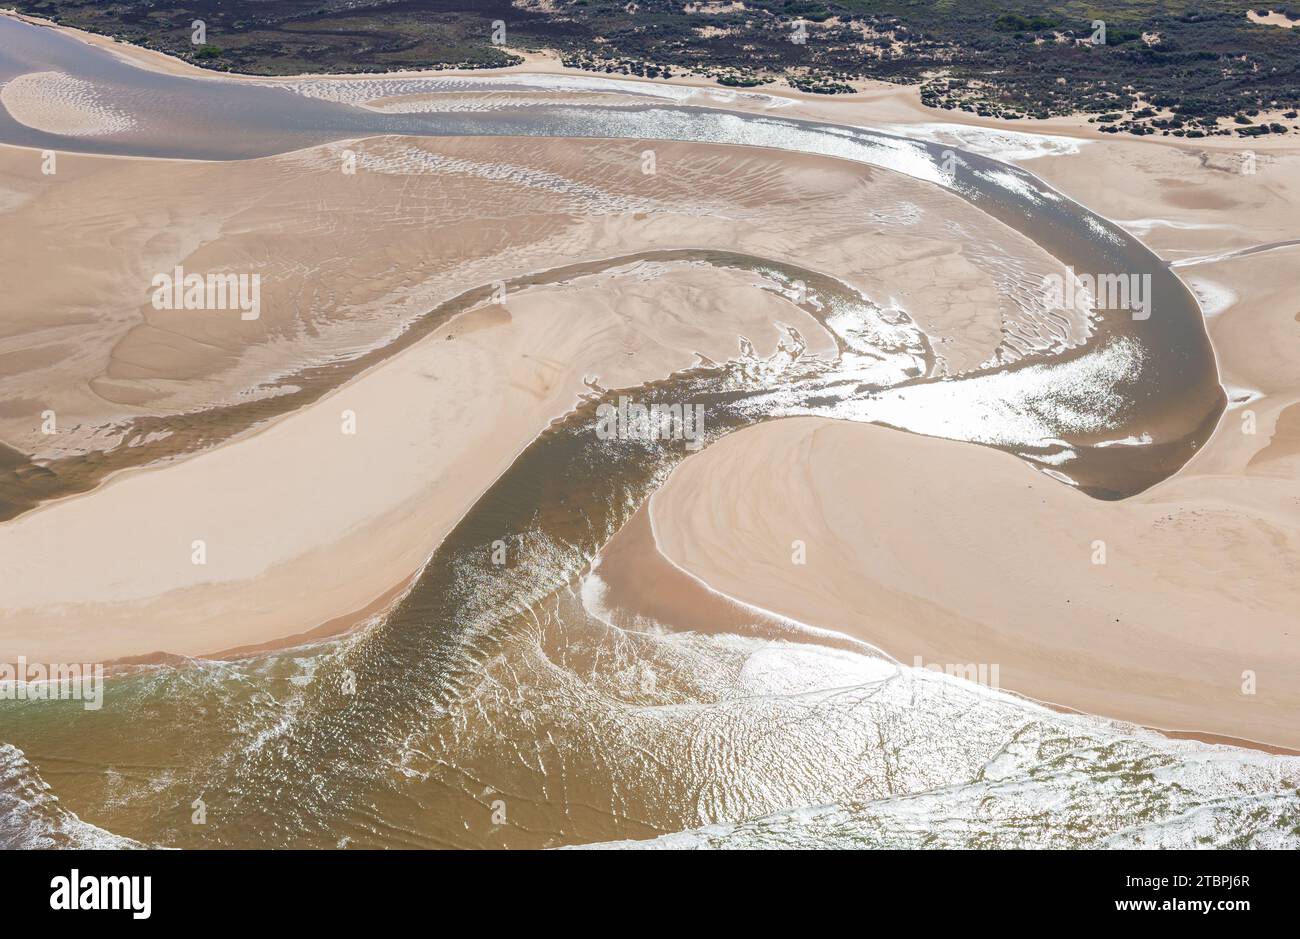 The Gamtoos River Mouth situated in the Eastern Cape Province of South Africa. Stock Photo